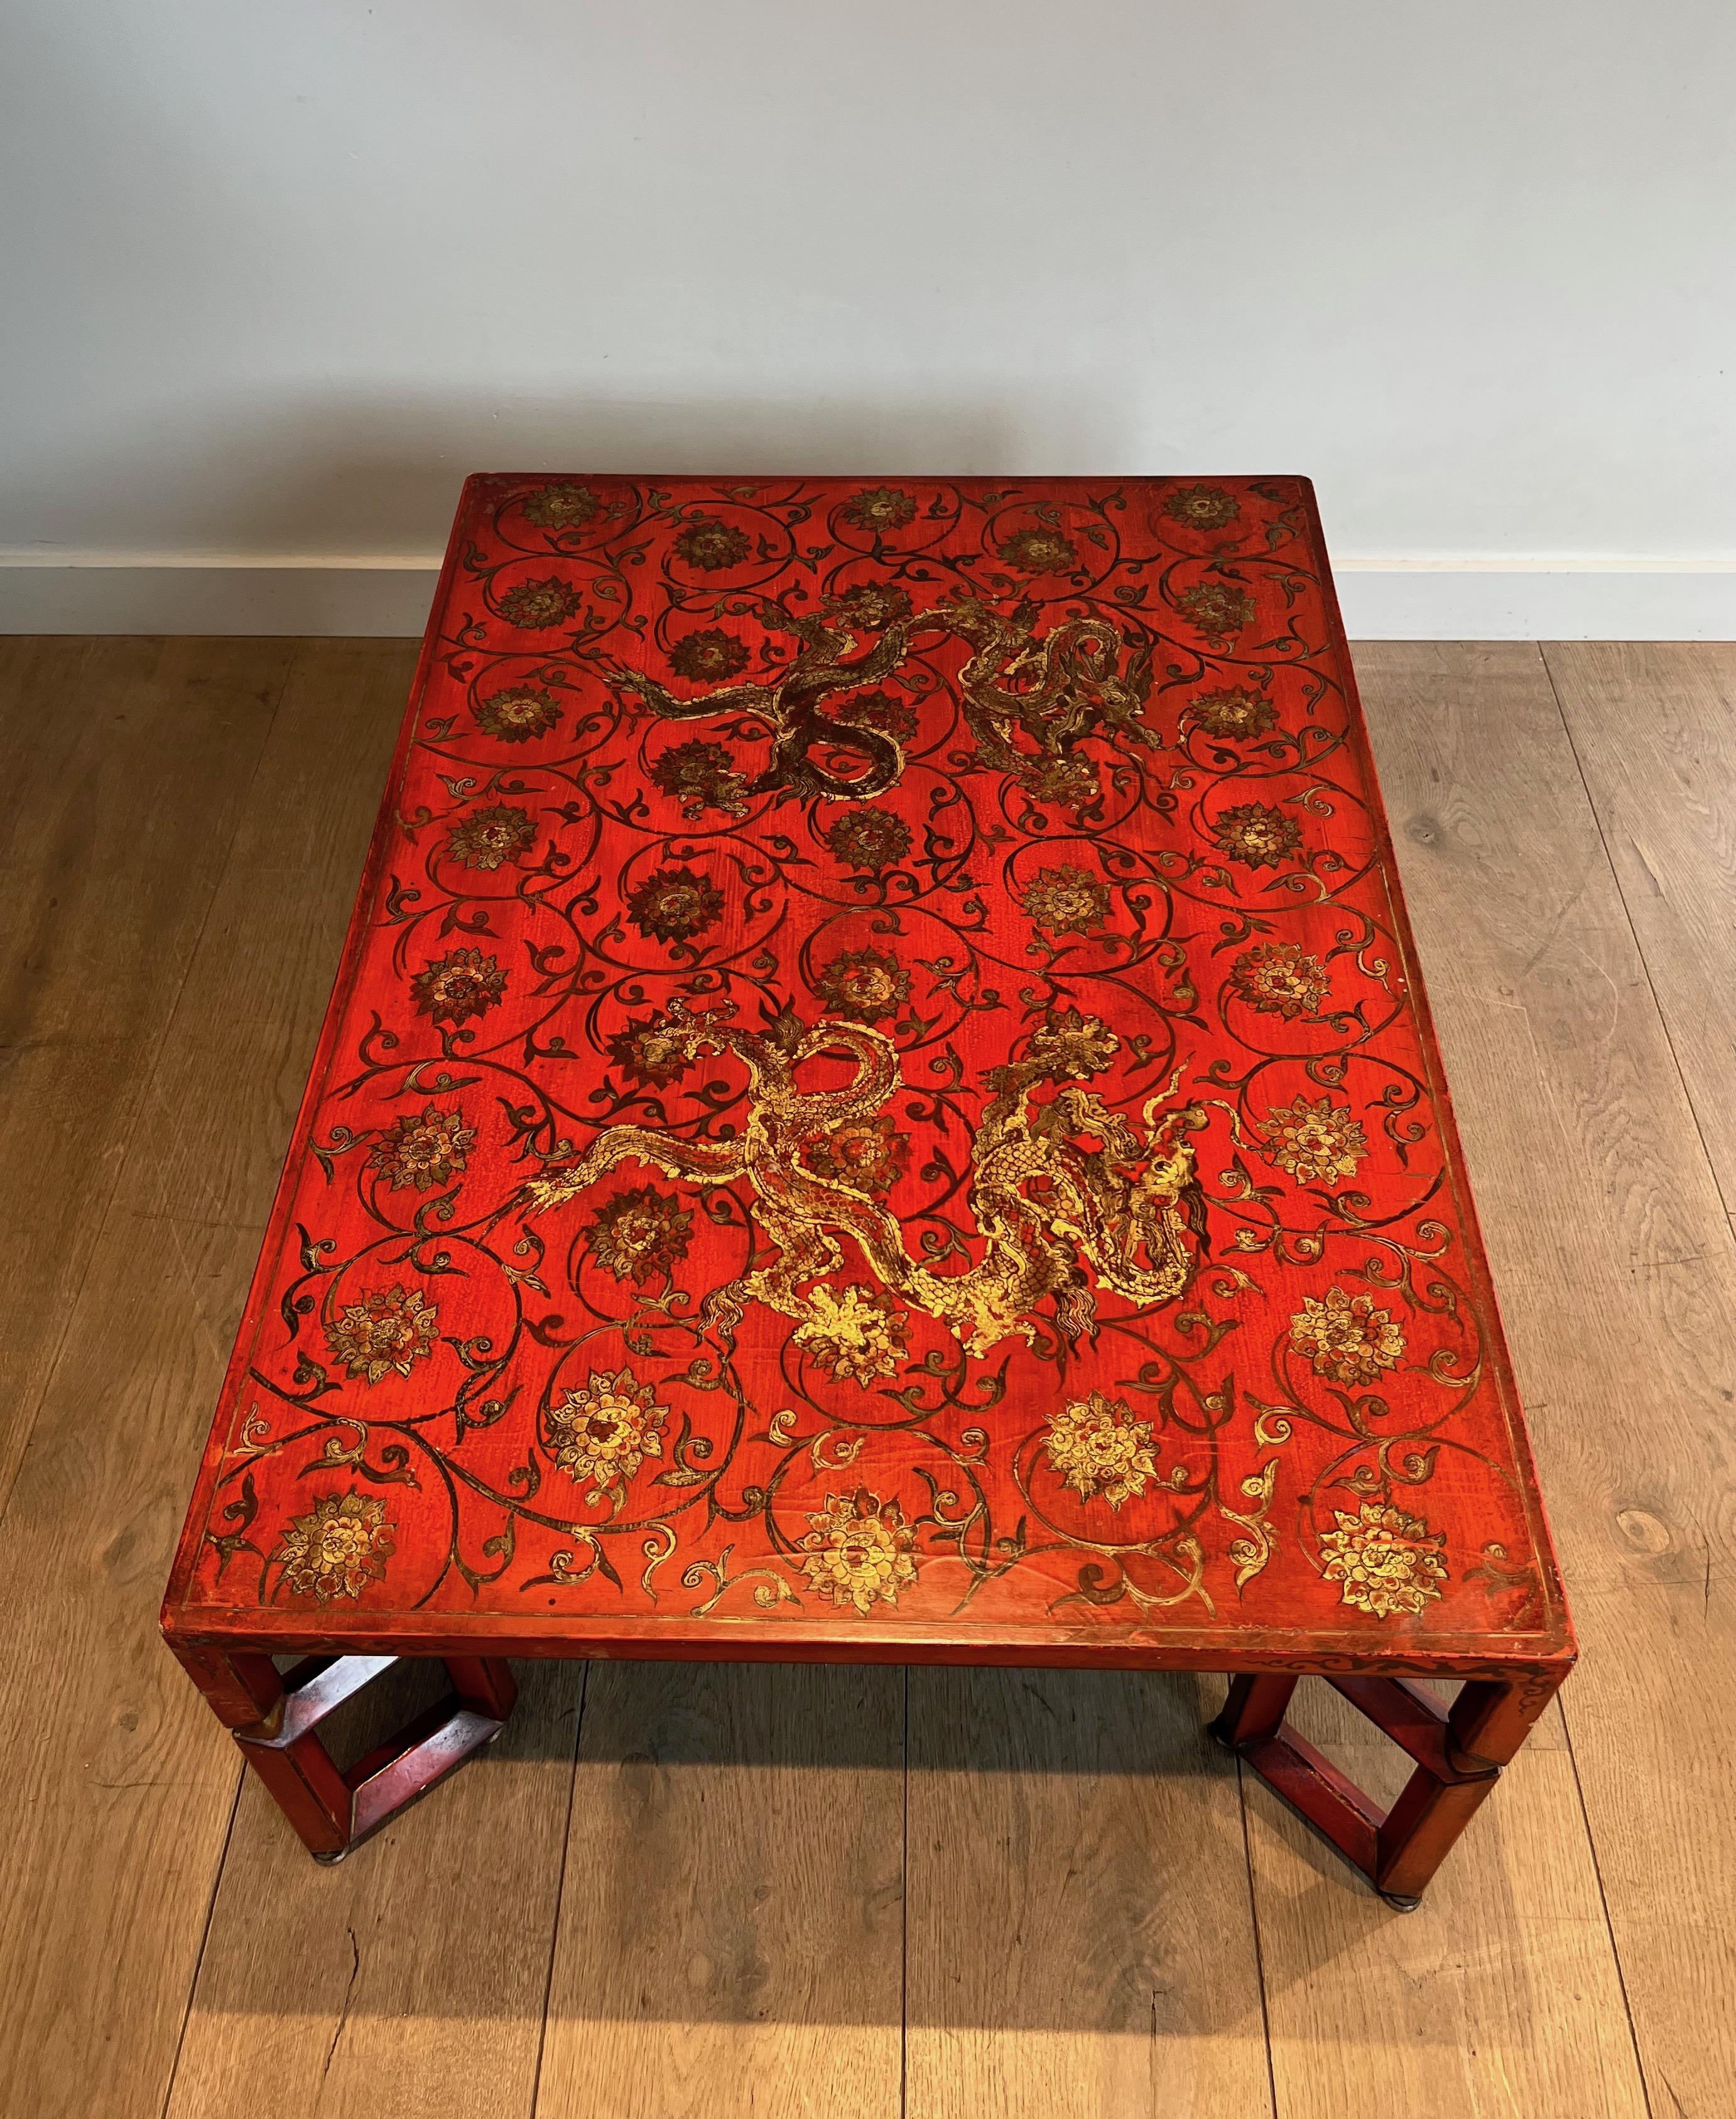 20th Century Large Red Lacquered Coffee Table with Gold Chinese Decorations For Sale